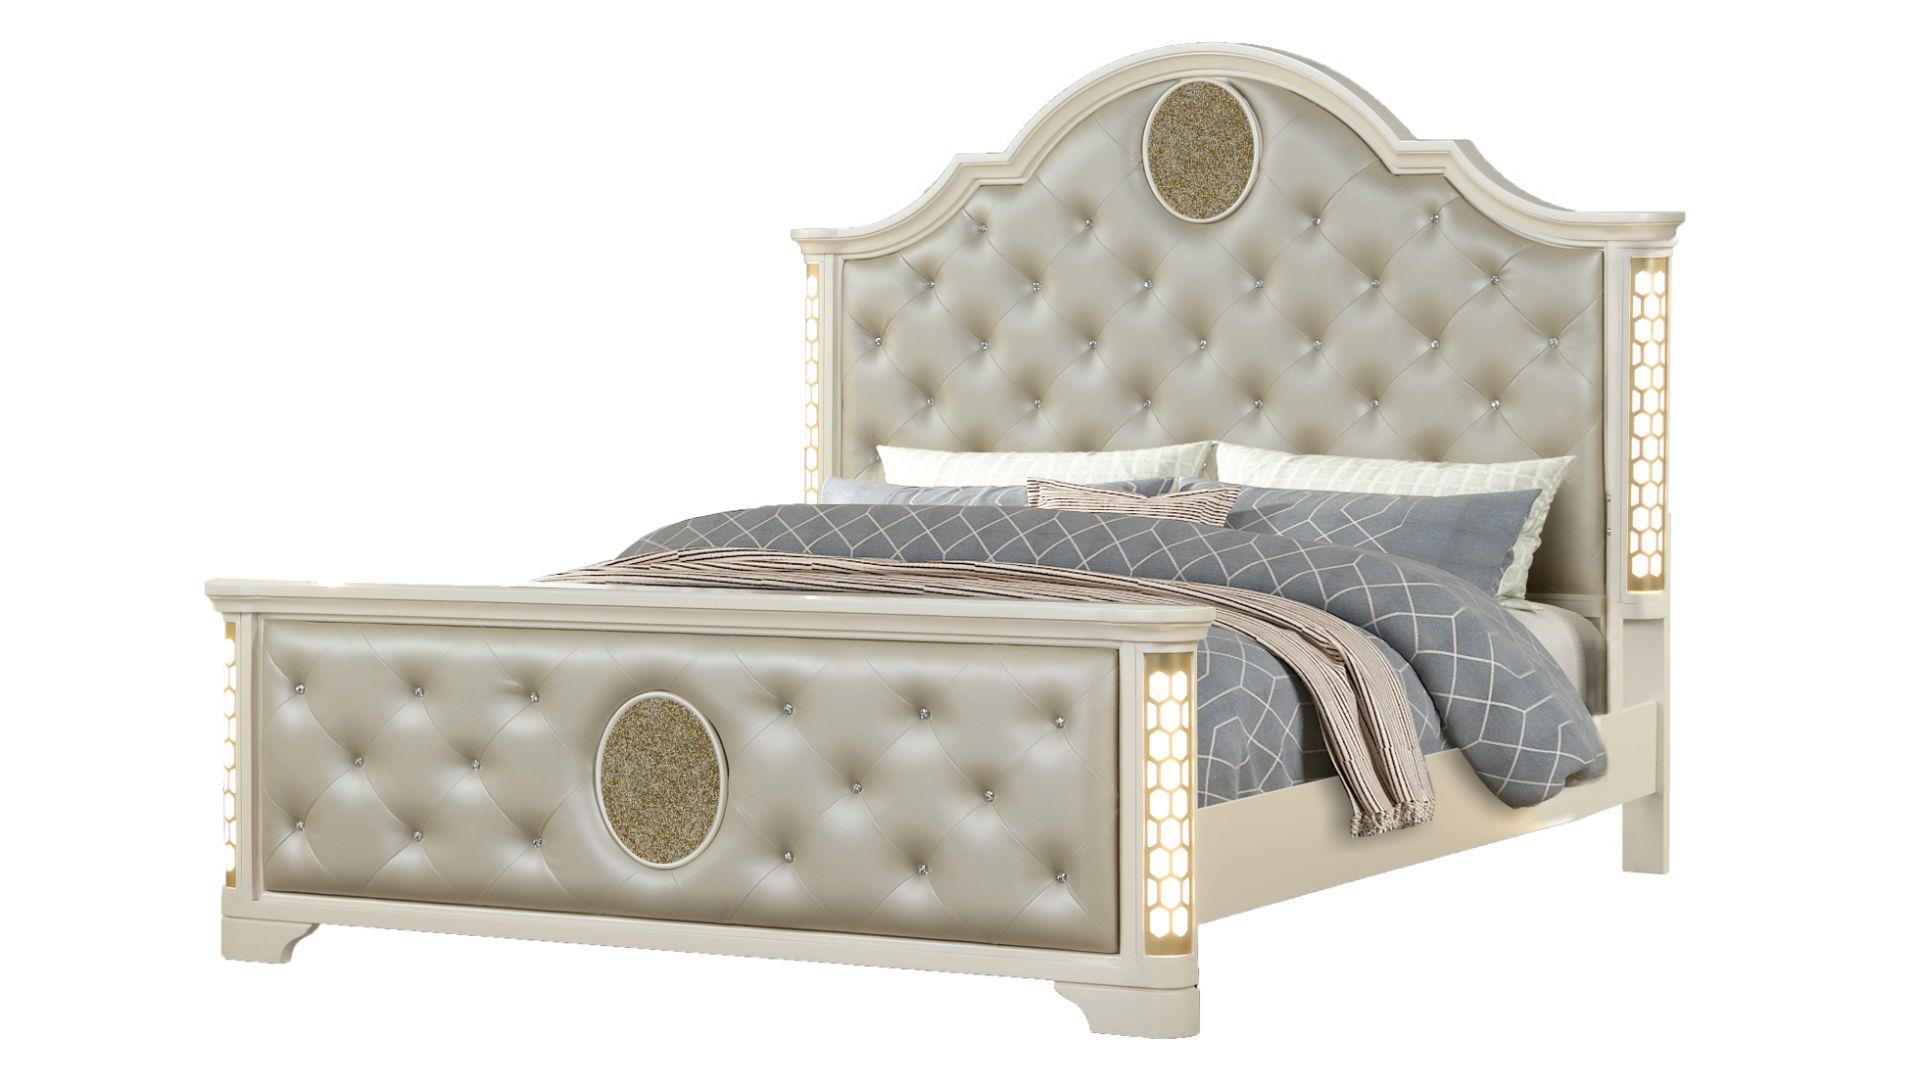 

    
Glam Champagne Queen Bedroom Set 5Pcs JASMINE Galaxy Home Old-World European
